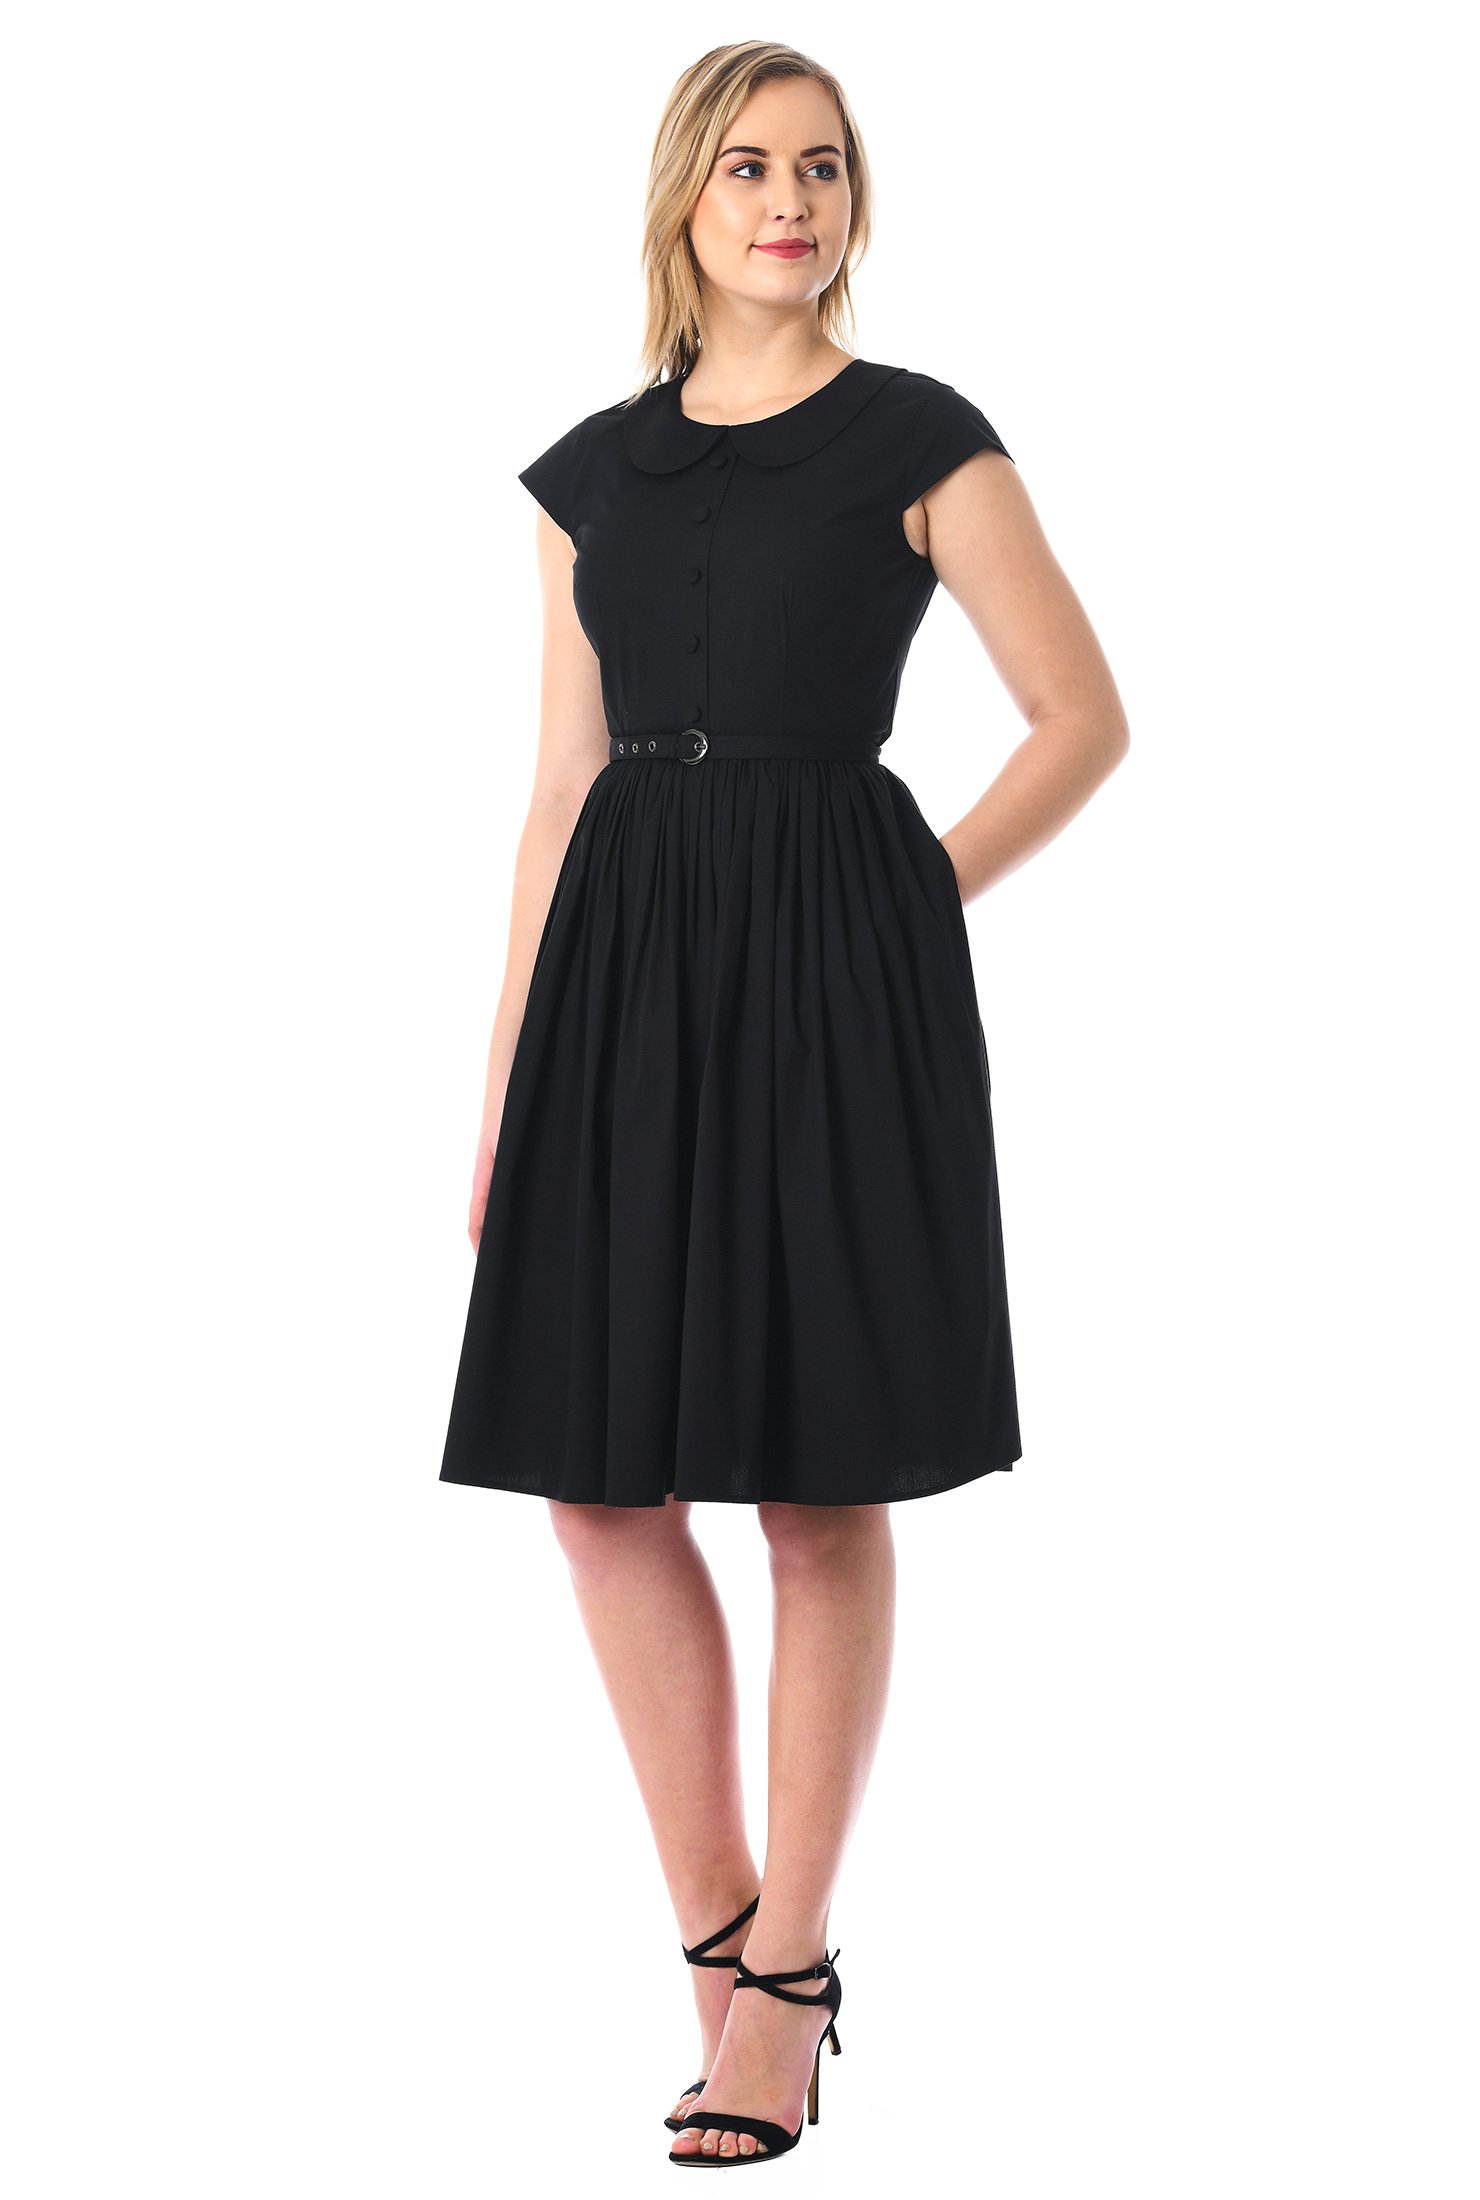 Dresses With Pockets – A list of sites selling dresses with pockets.